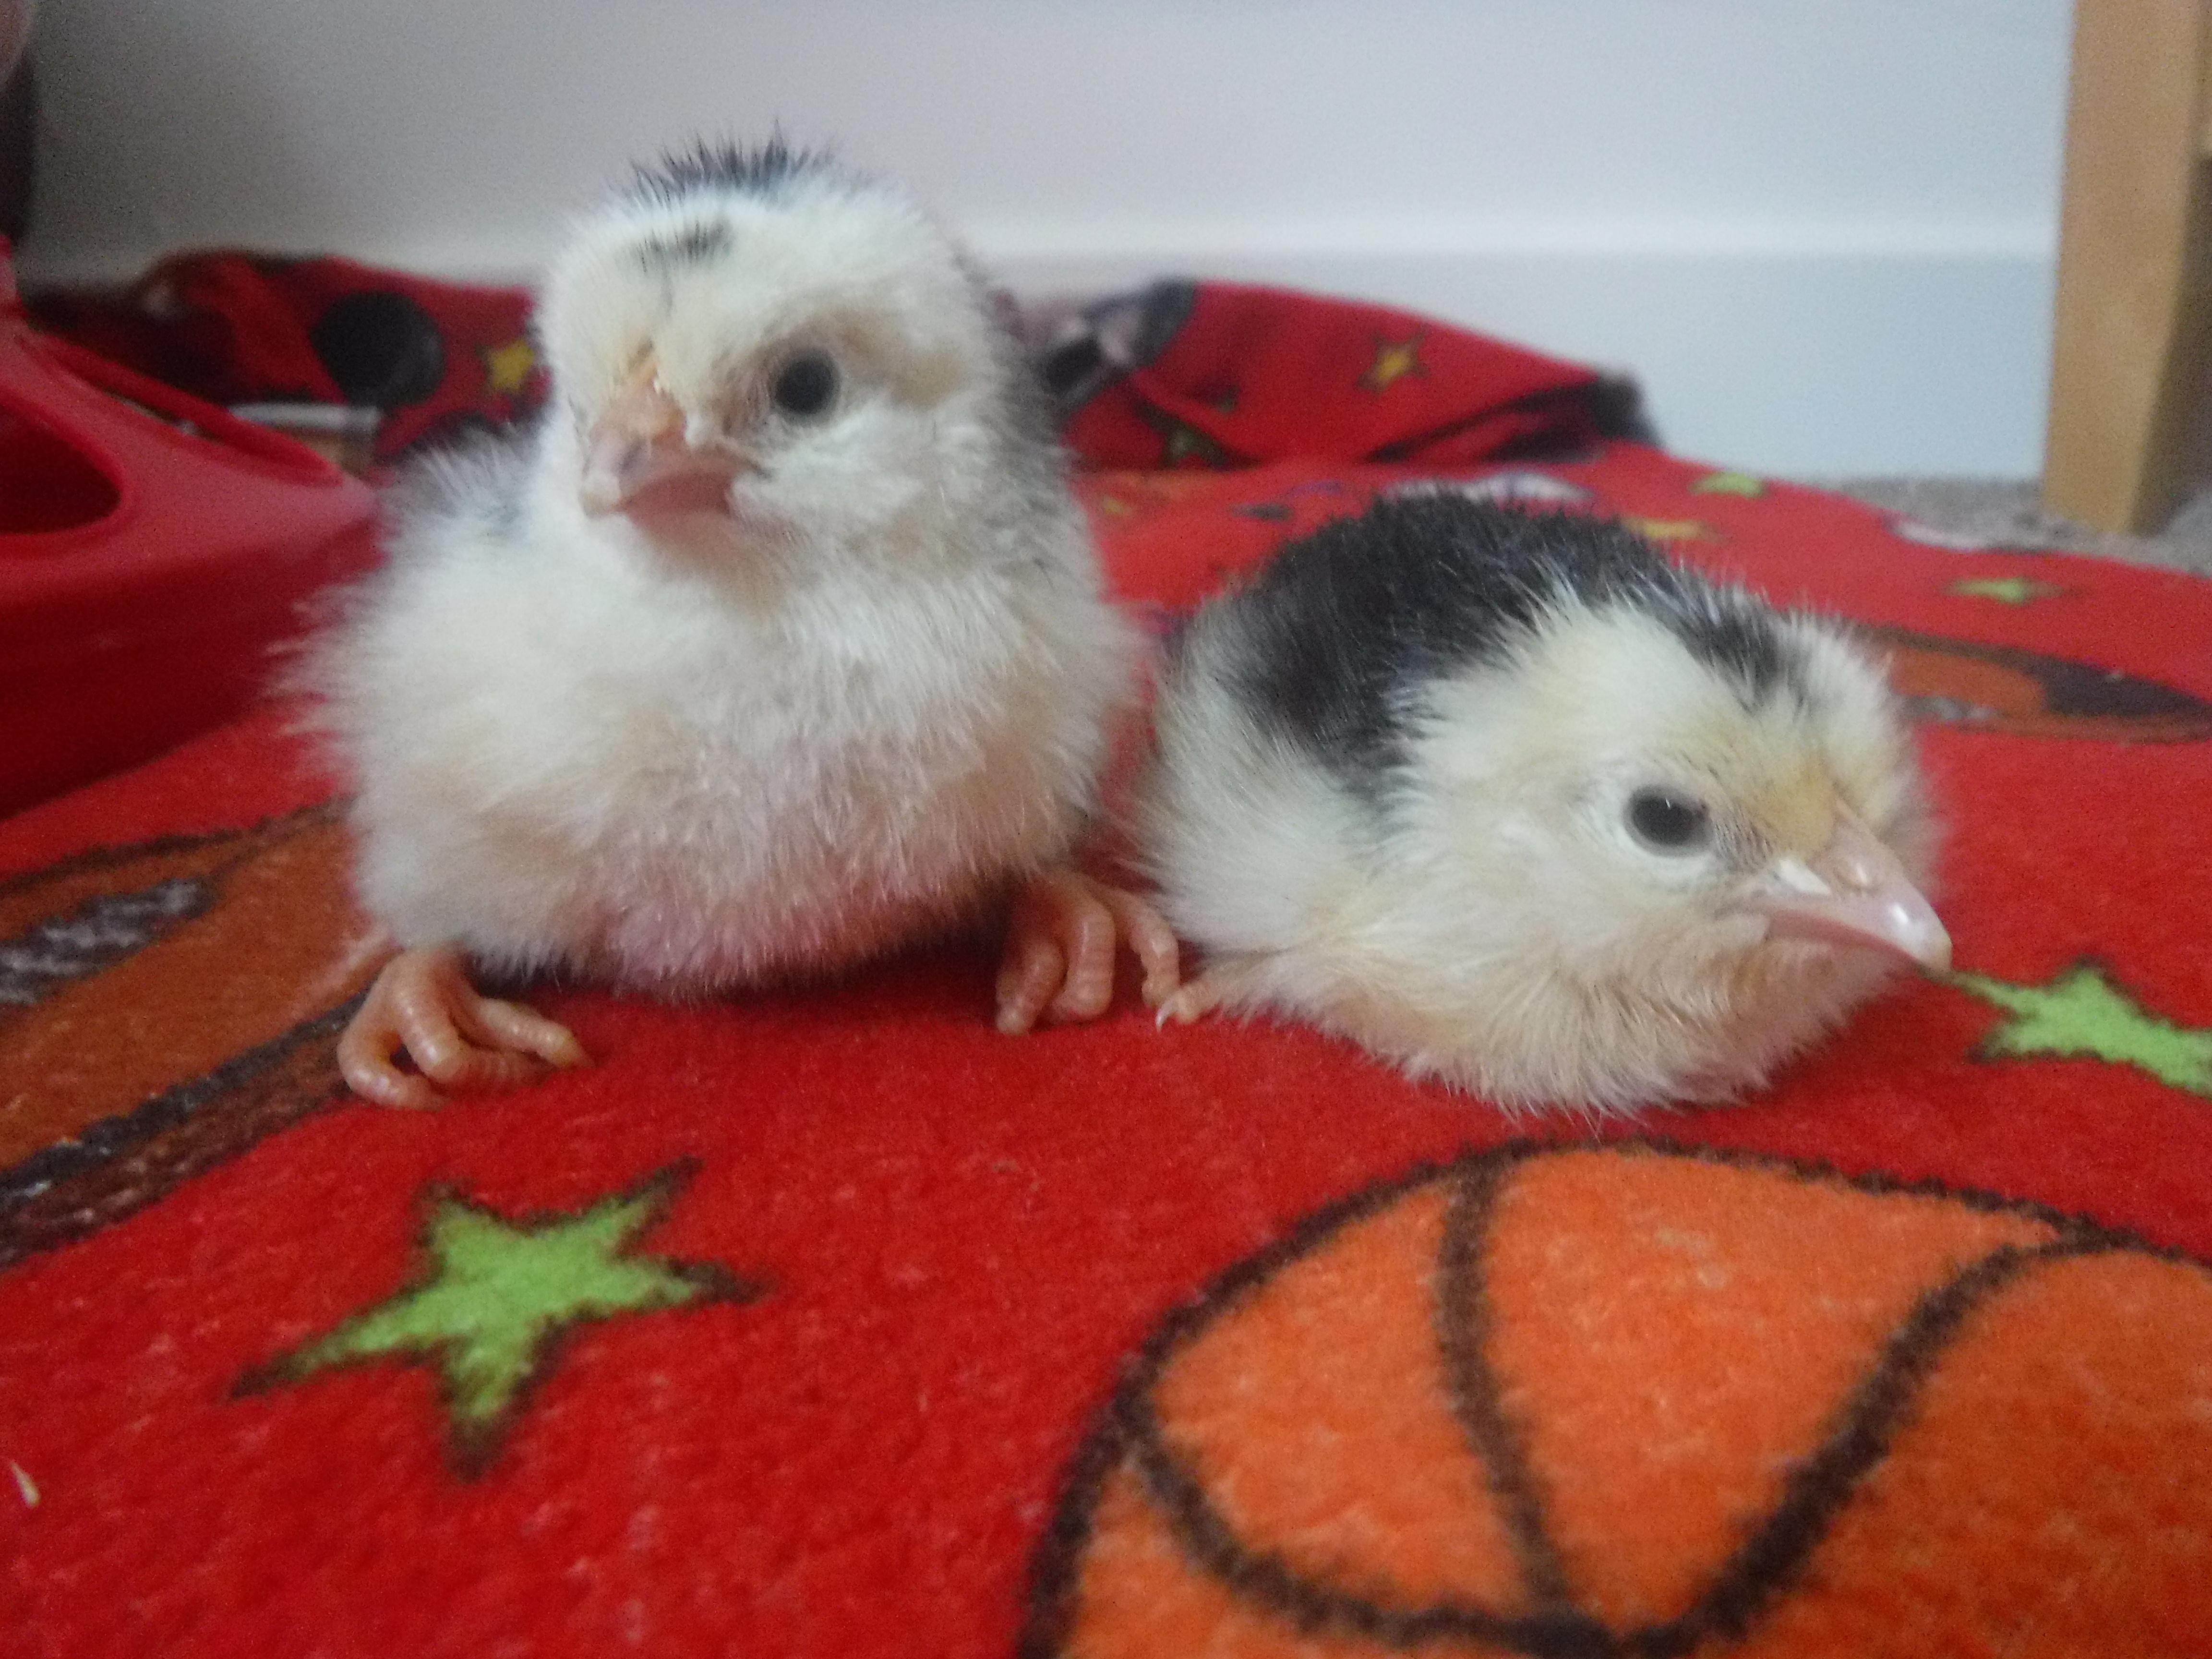 chicks are here!!!